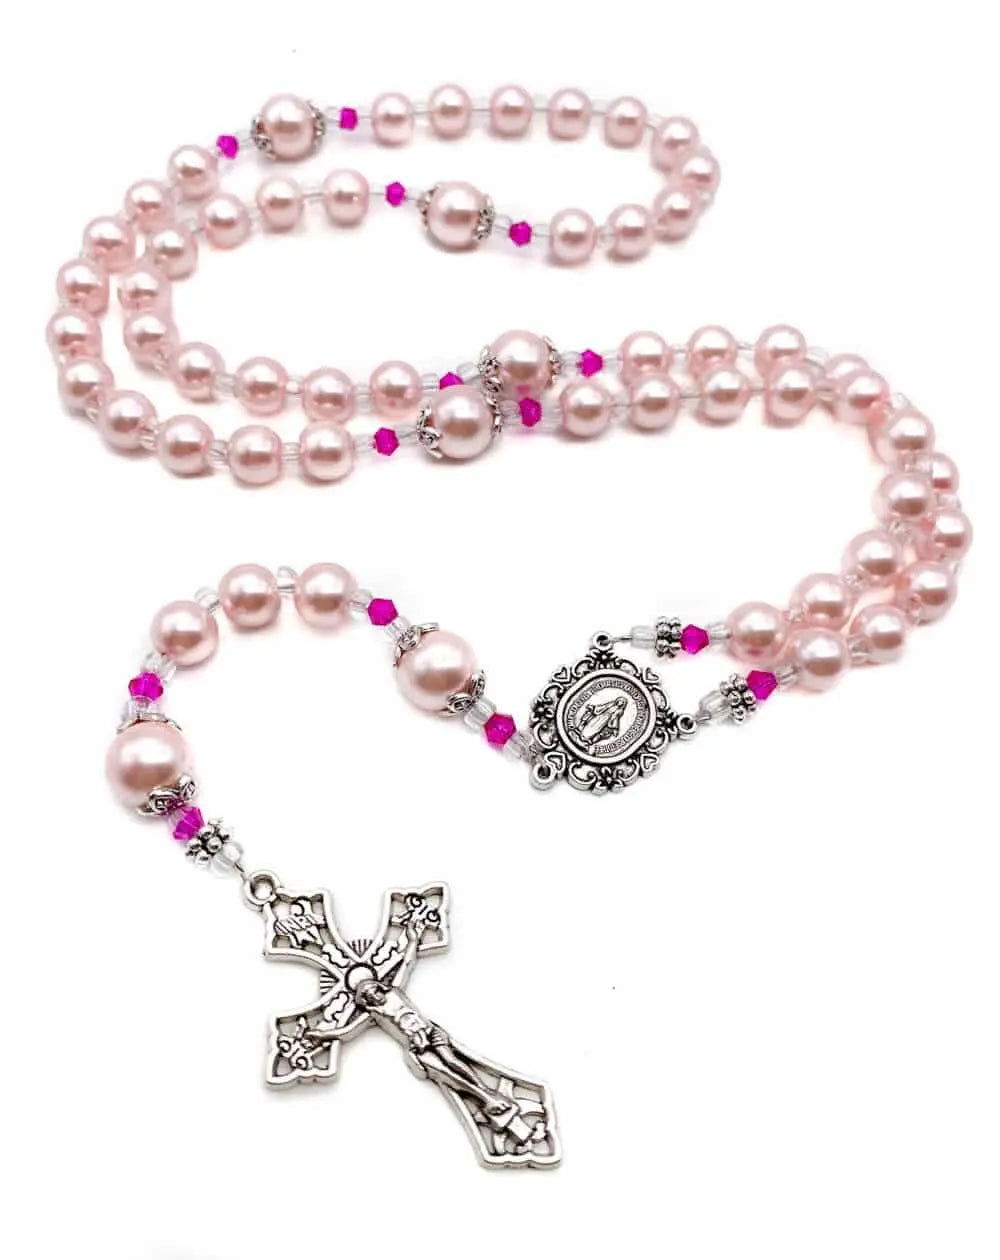 24-Inch Genuine Freshwater Pearl Rosary | Discount Catholic Products